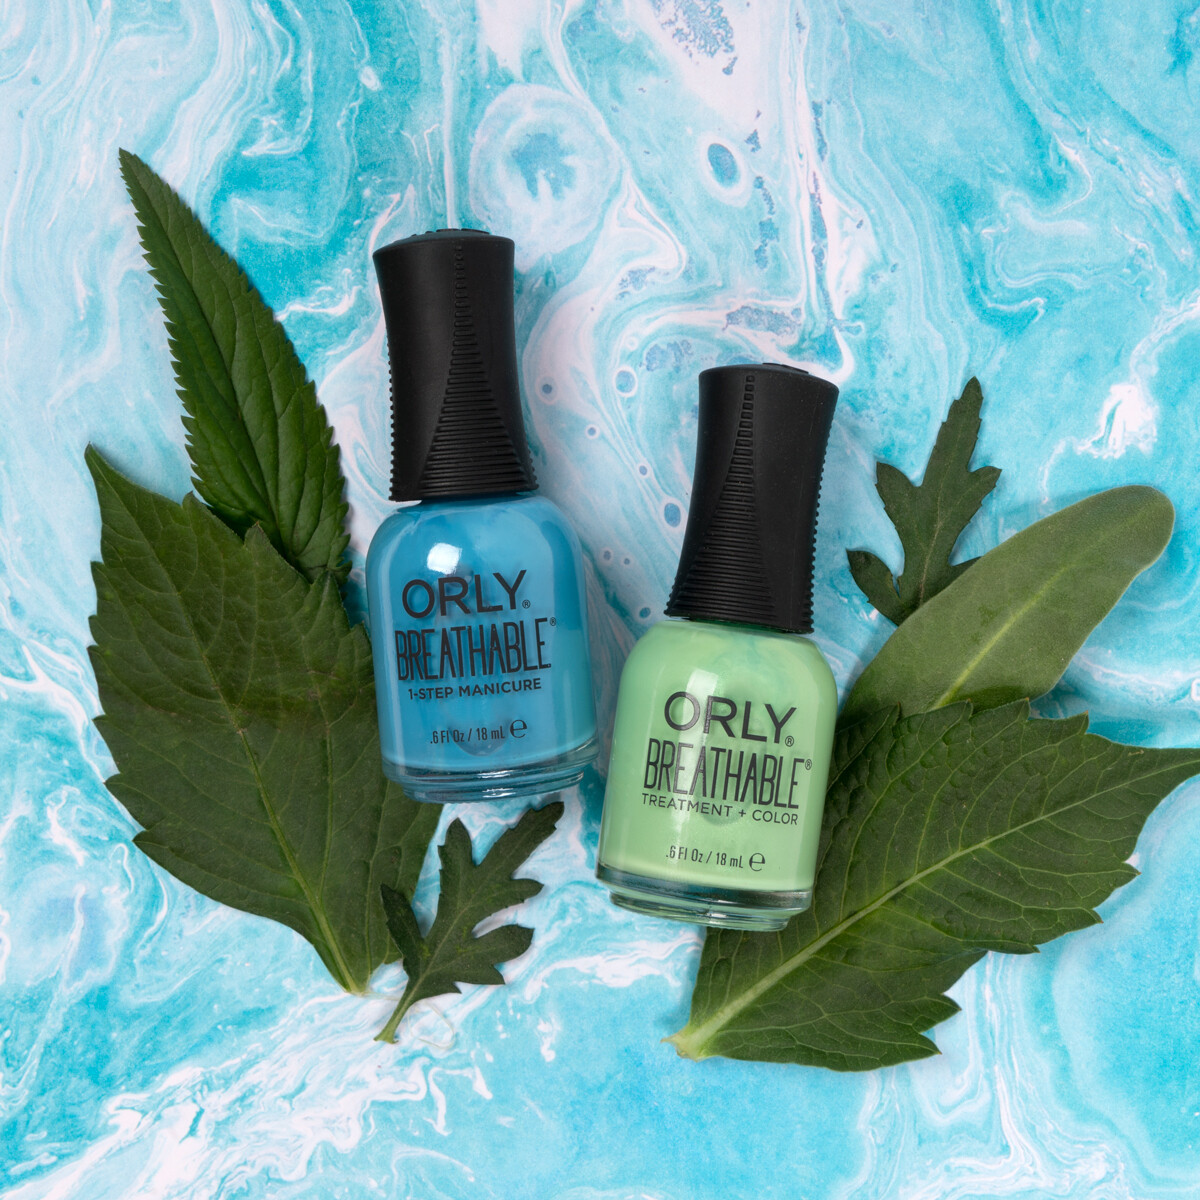 ORLY Breathable Treatment + Color  DOWNPOUR WHATEVER 18mL